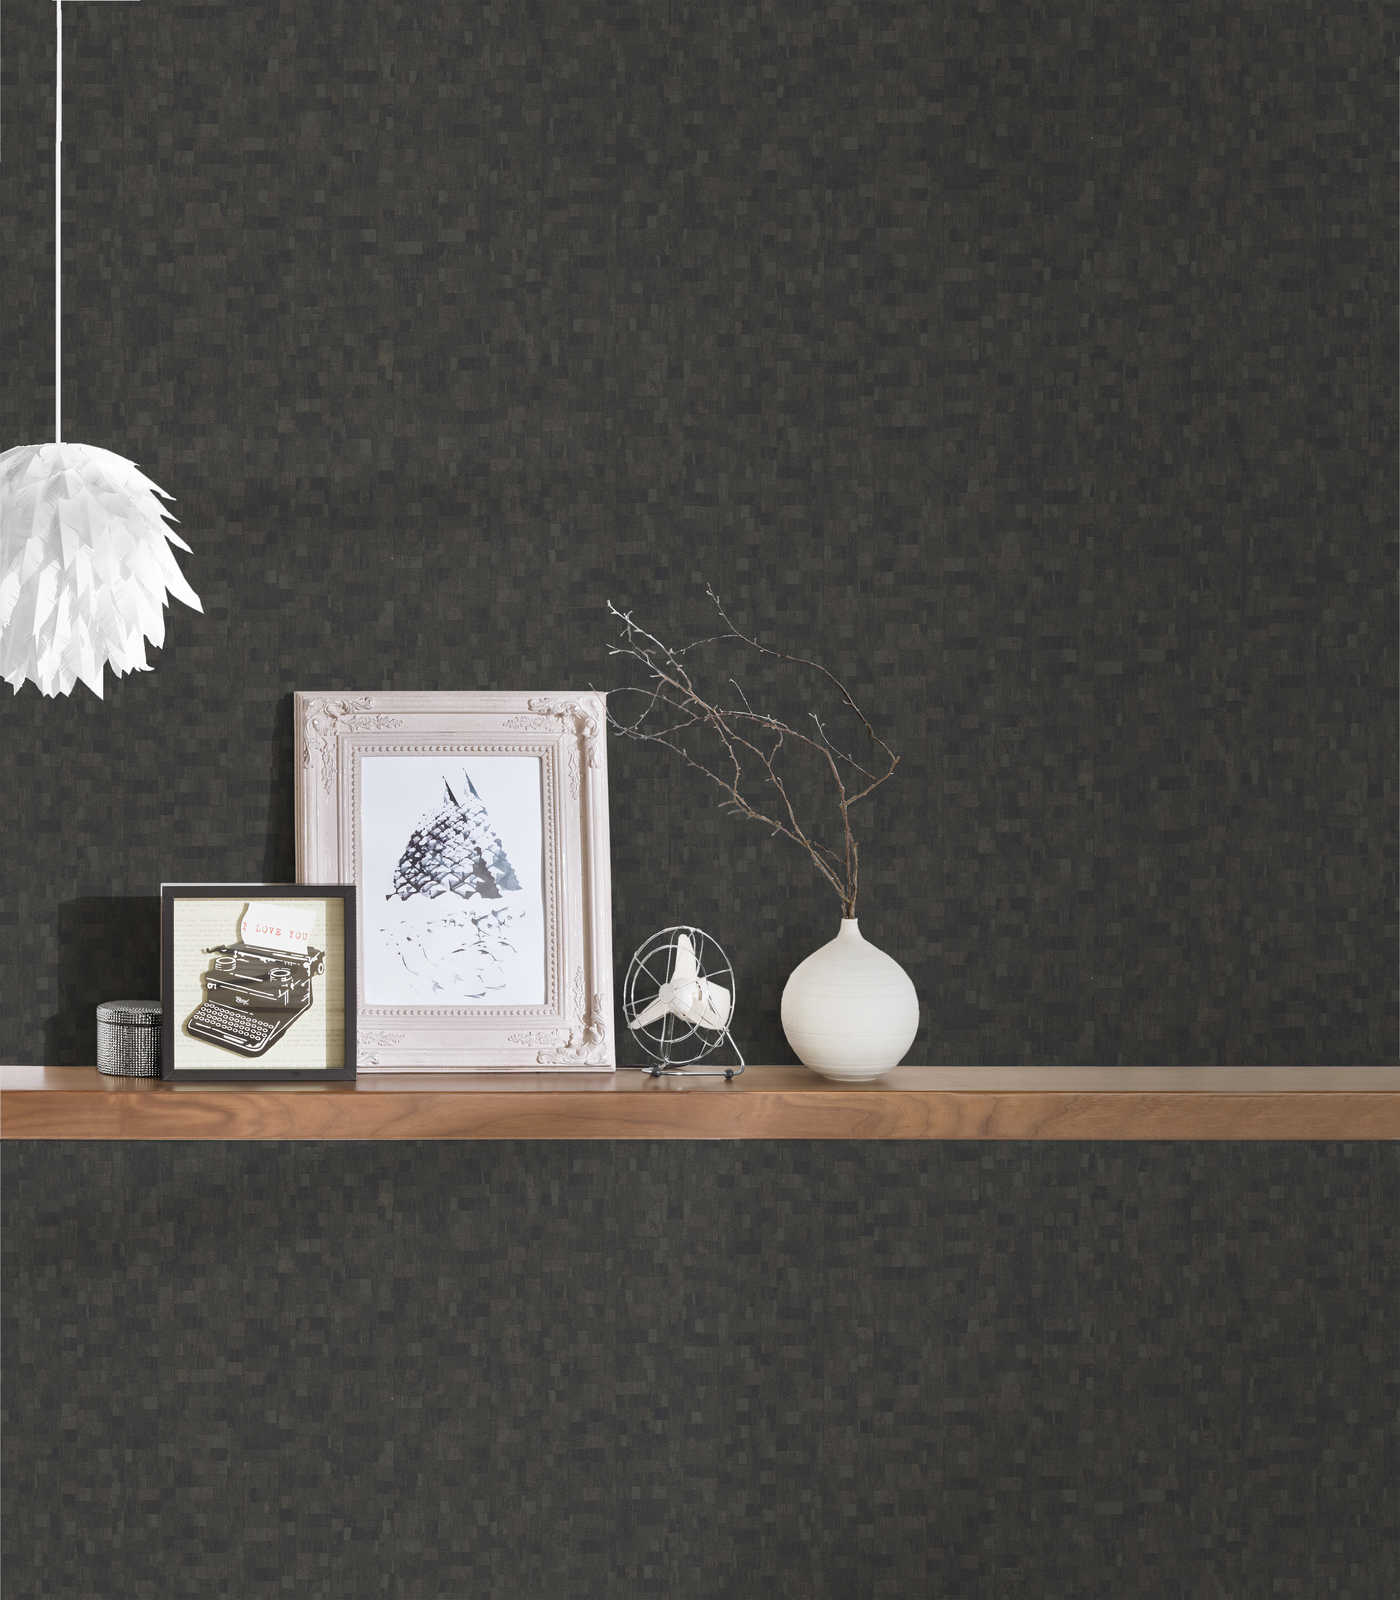             Non-woven wallpaper with texture design & mosaic effect - brown, black
        